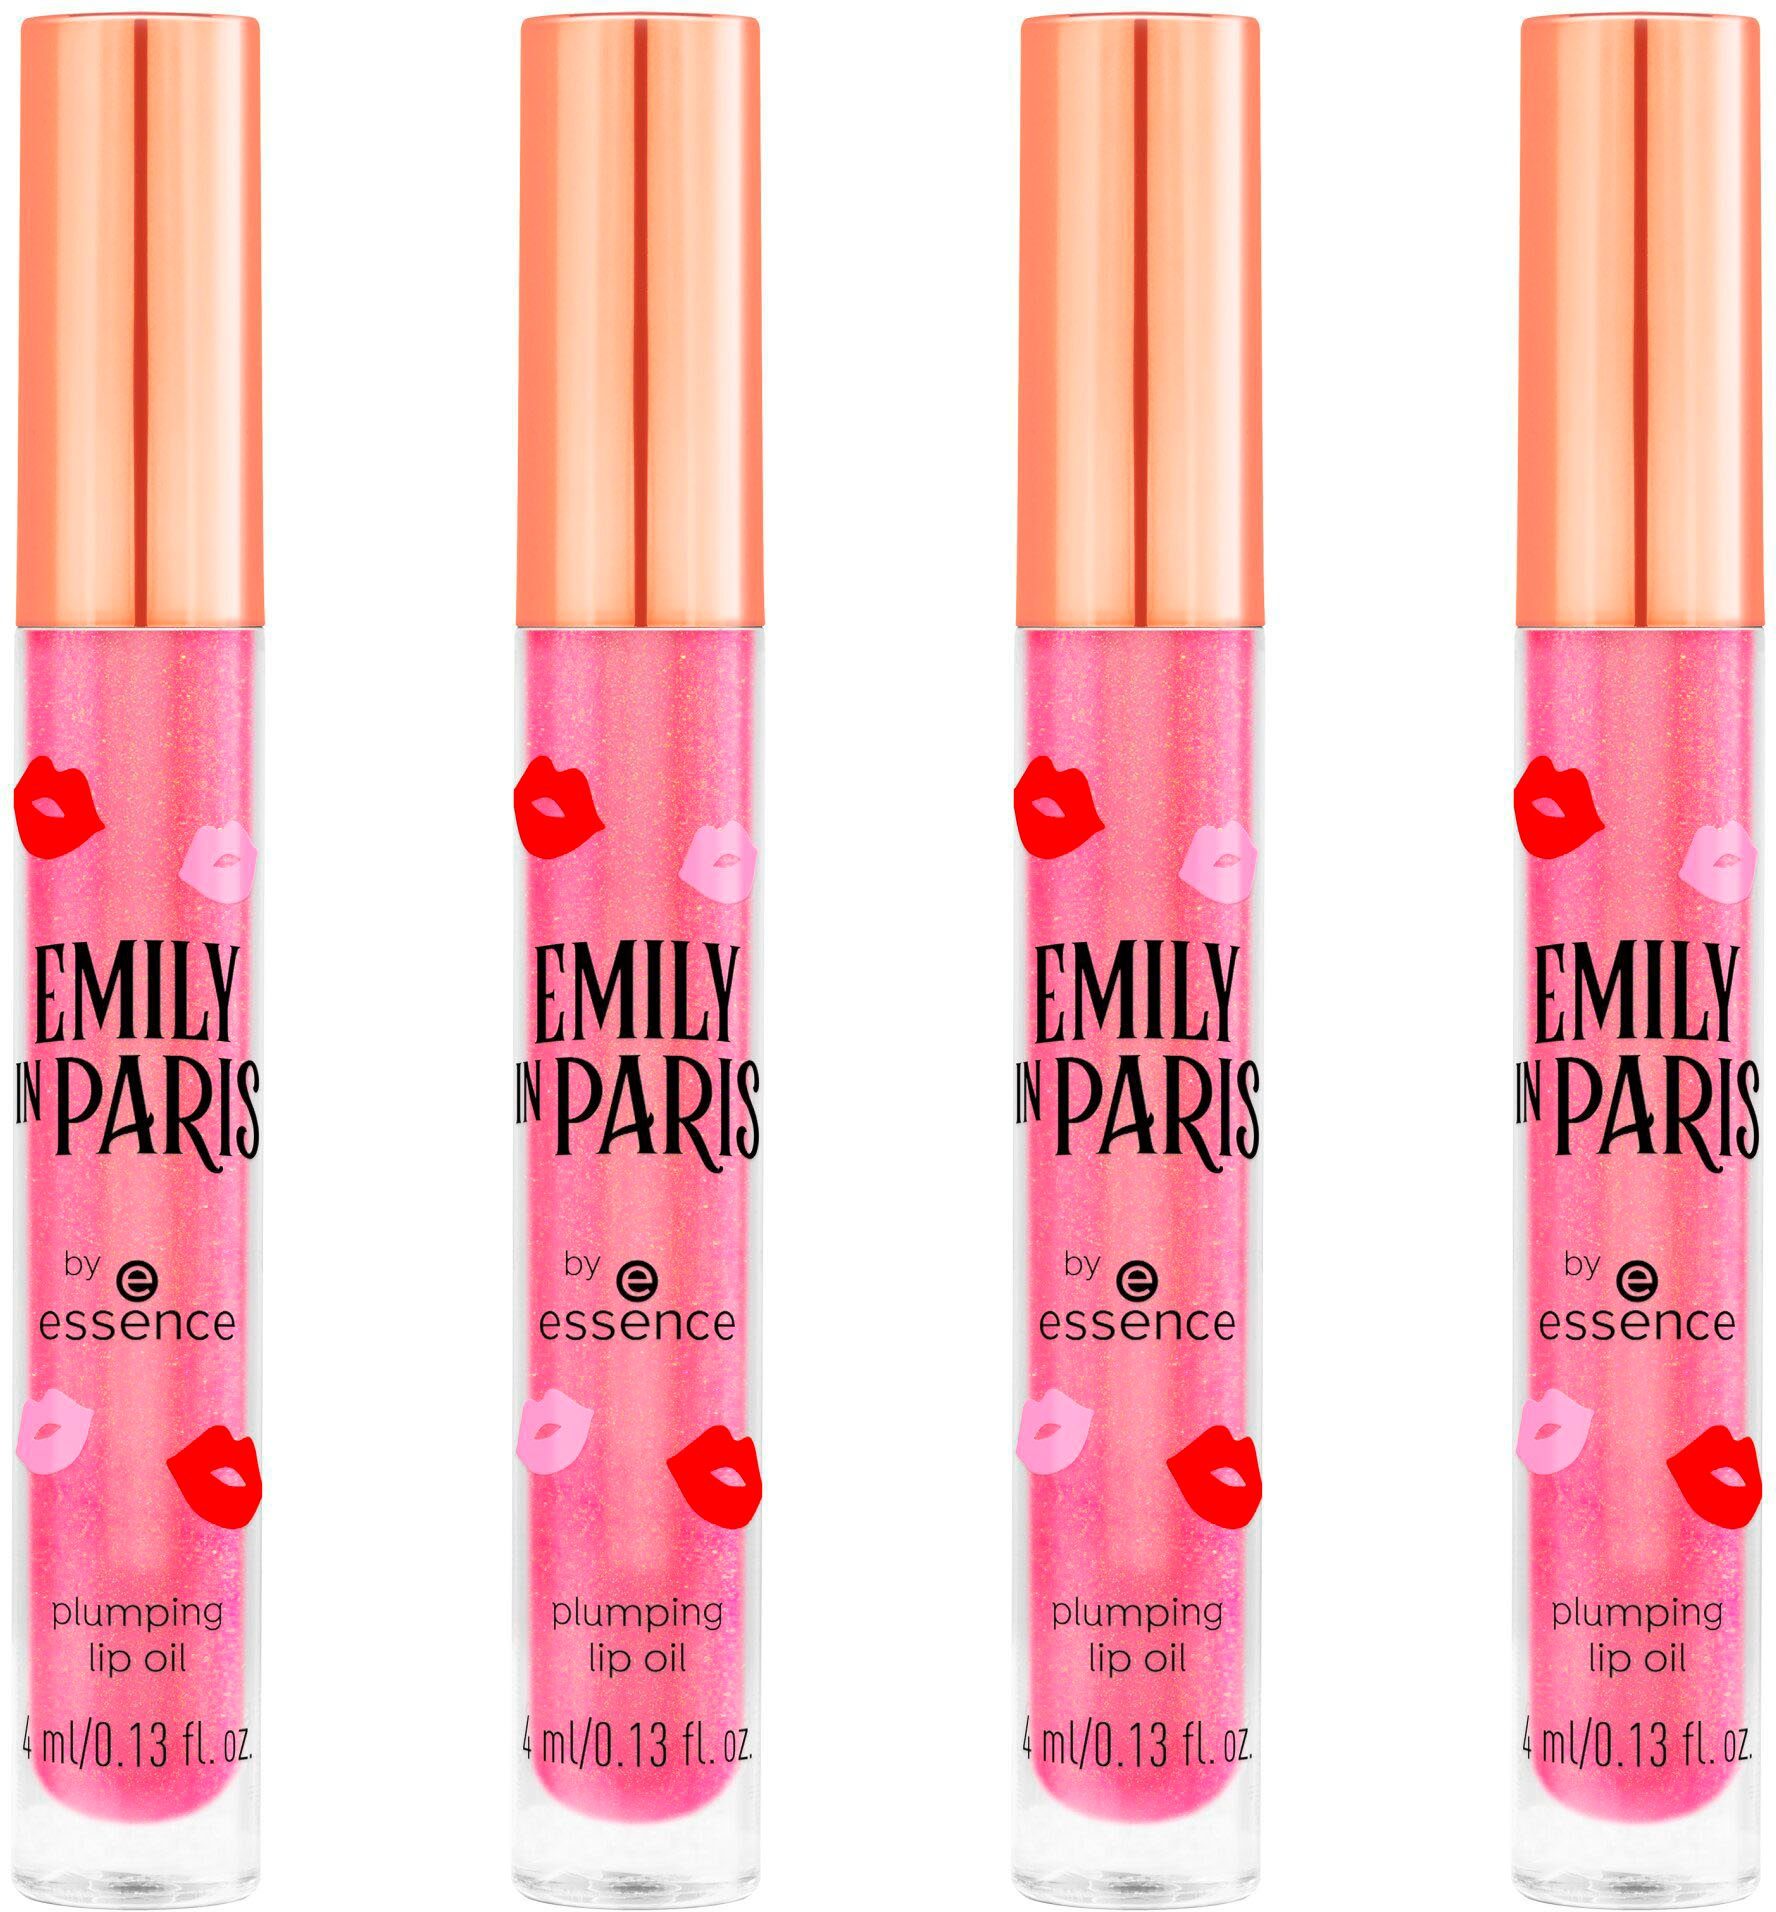 Essence Lipgloss EMILY IN PARIS by essence plumping lip oil